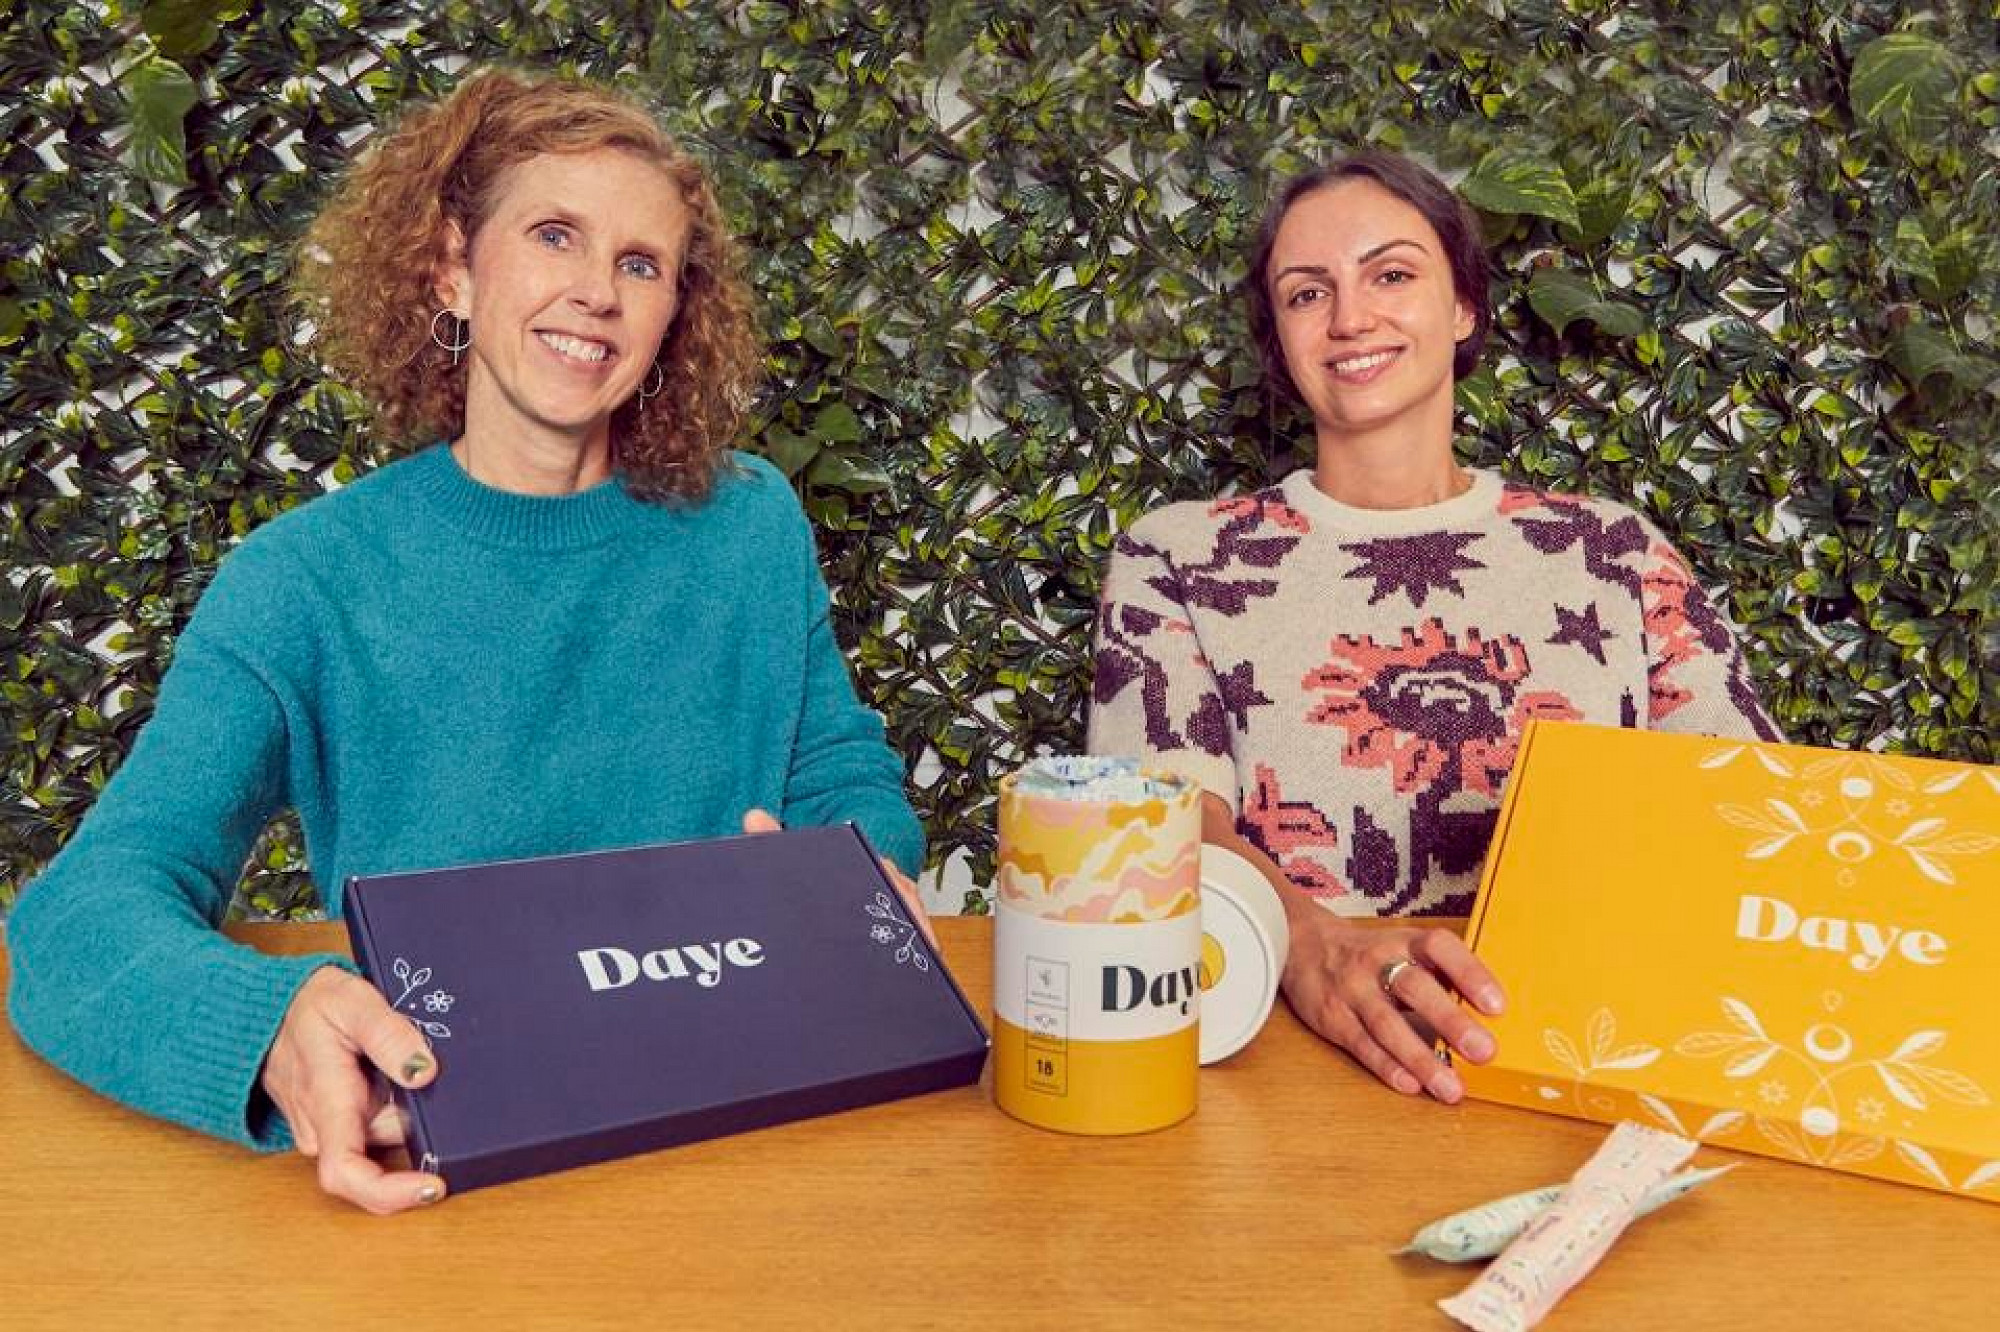 Daye Launches World’s First Tampon-Based At-Home Screening Kit, Raises $11.5 Million In Latest Funding Round